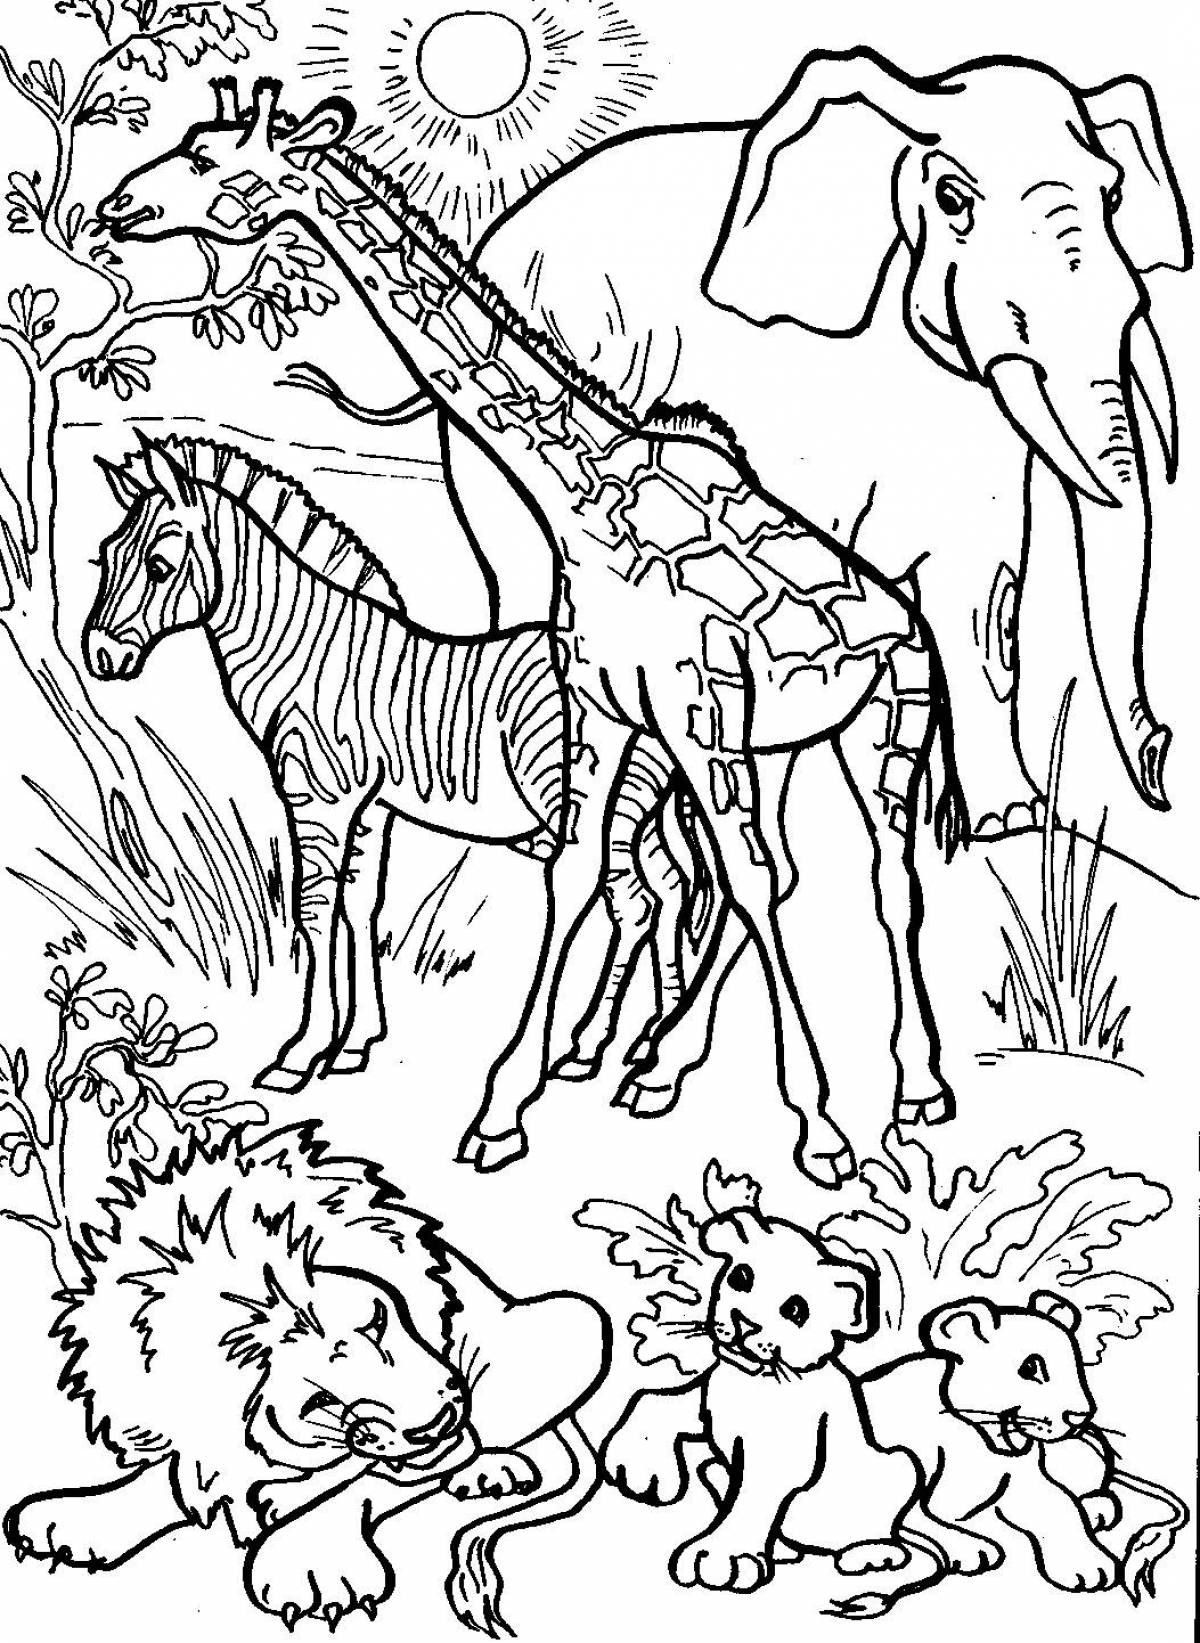 Enthusiastic coloring pages animals of hot countries for preschoolers